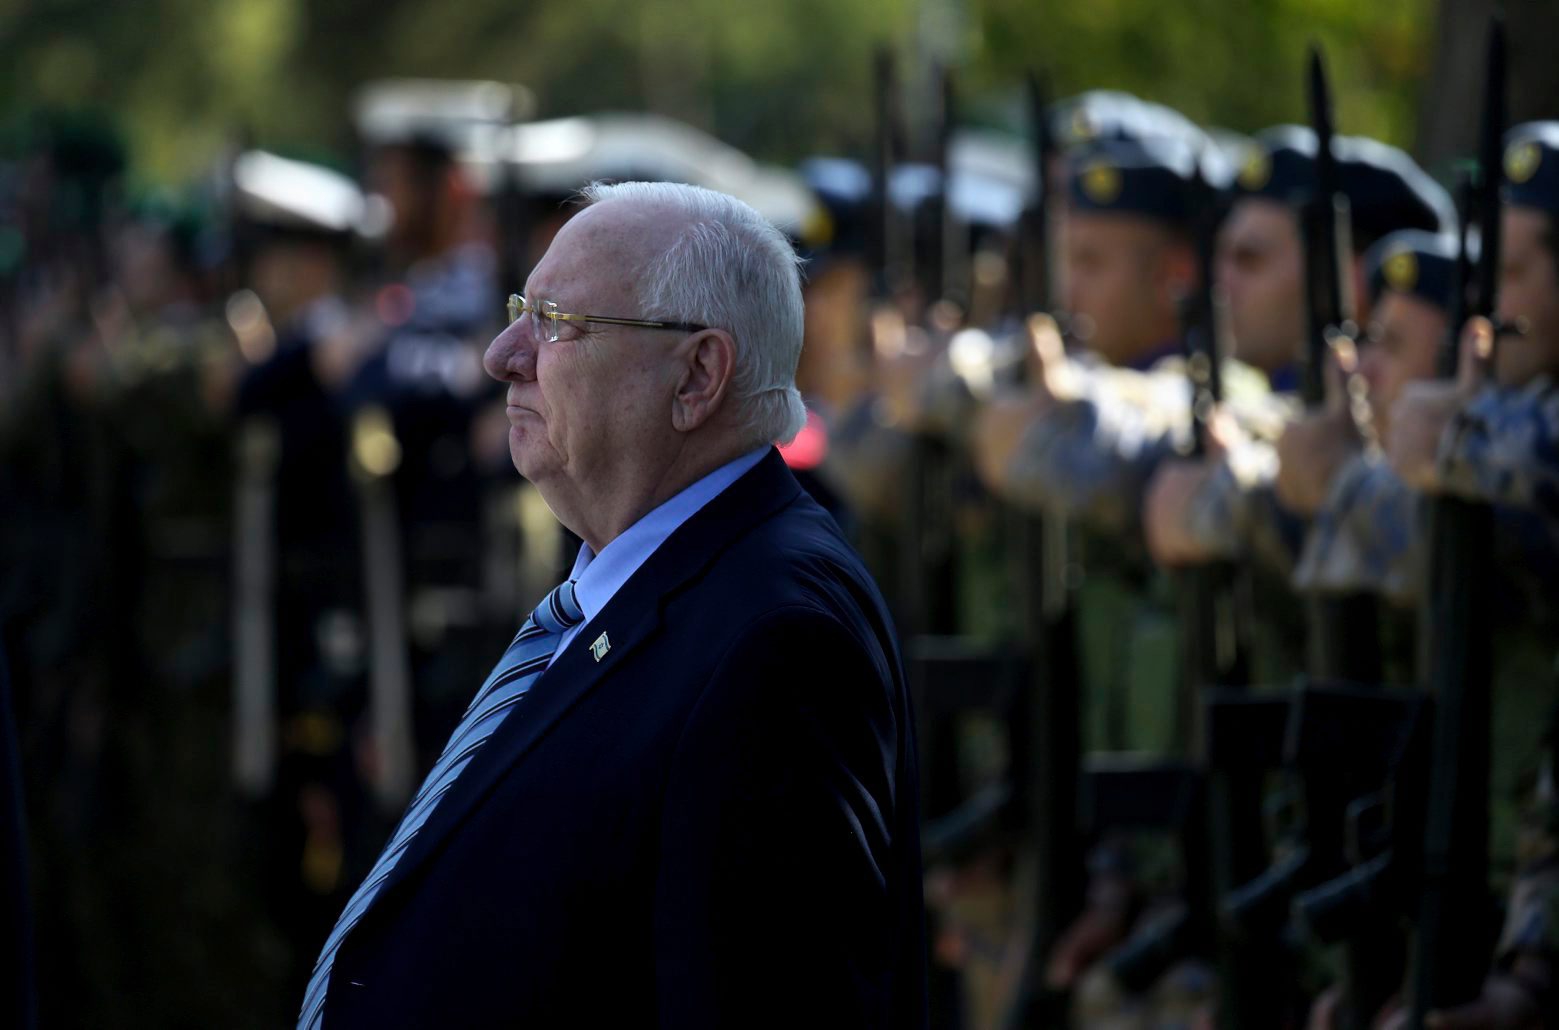 Israel's President Reuven Rivlin reviews a military guard of honor during a welcoming ceremony before a meeting with Cyprus' president Nicos Anastasiades at the presidential palace in divided capital Nicosia, Cyprus, on Tuesday, Feb. 12, 2019. Rivlin is in Cyprus for one-day official visit for talks. (AP Photo/Petros Karadjias) CYPRUS ISRAEL